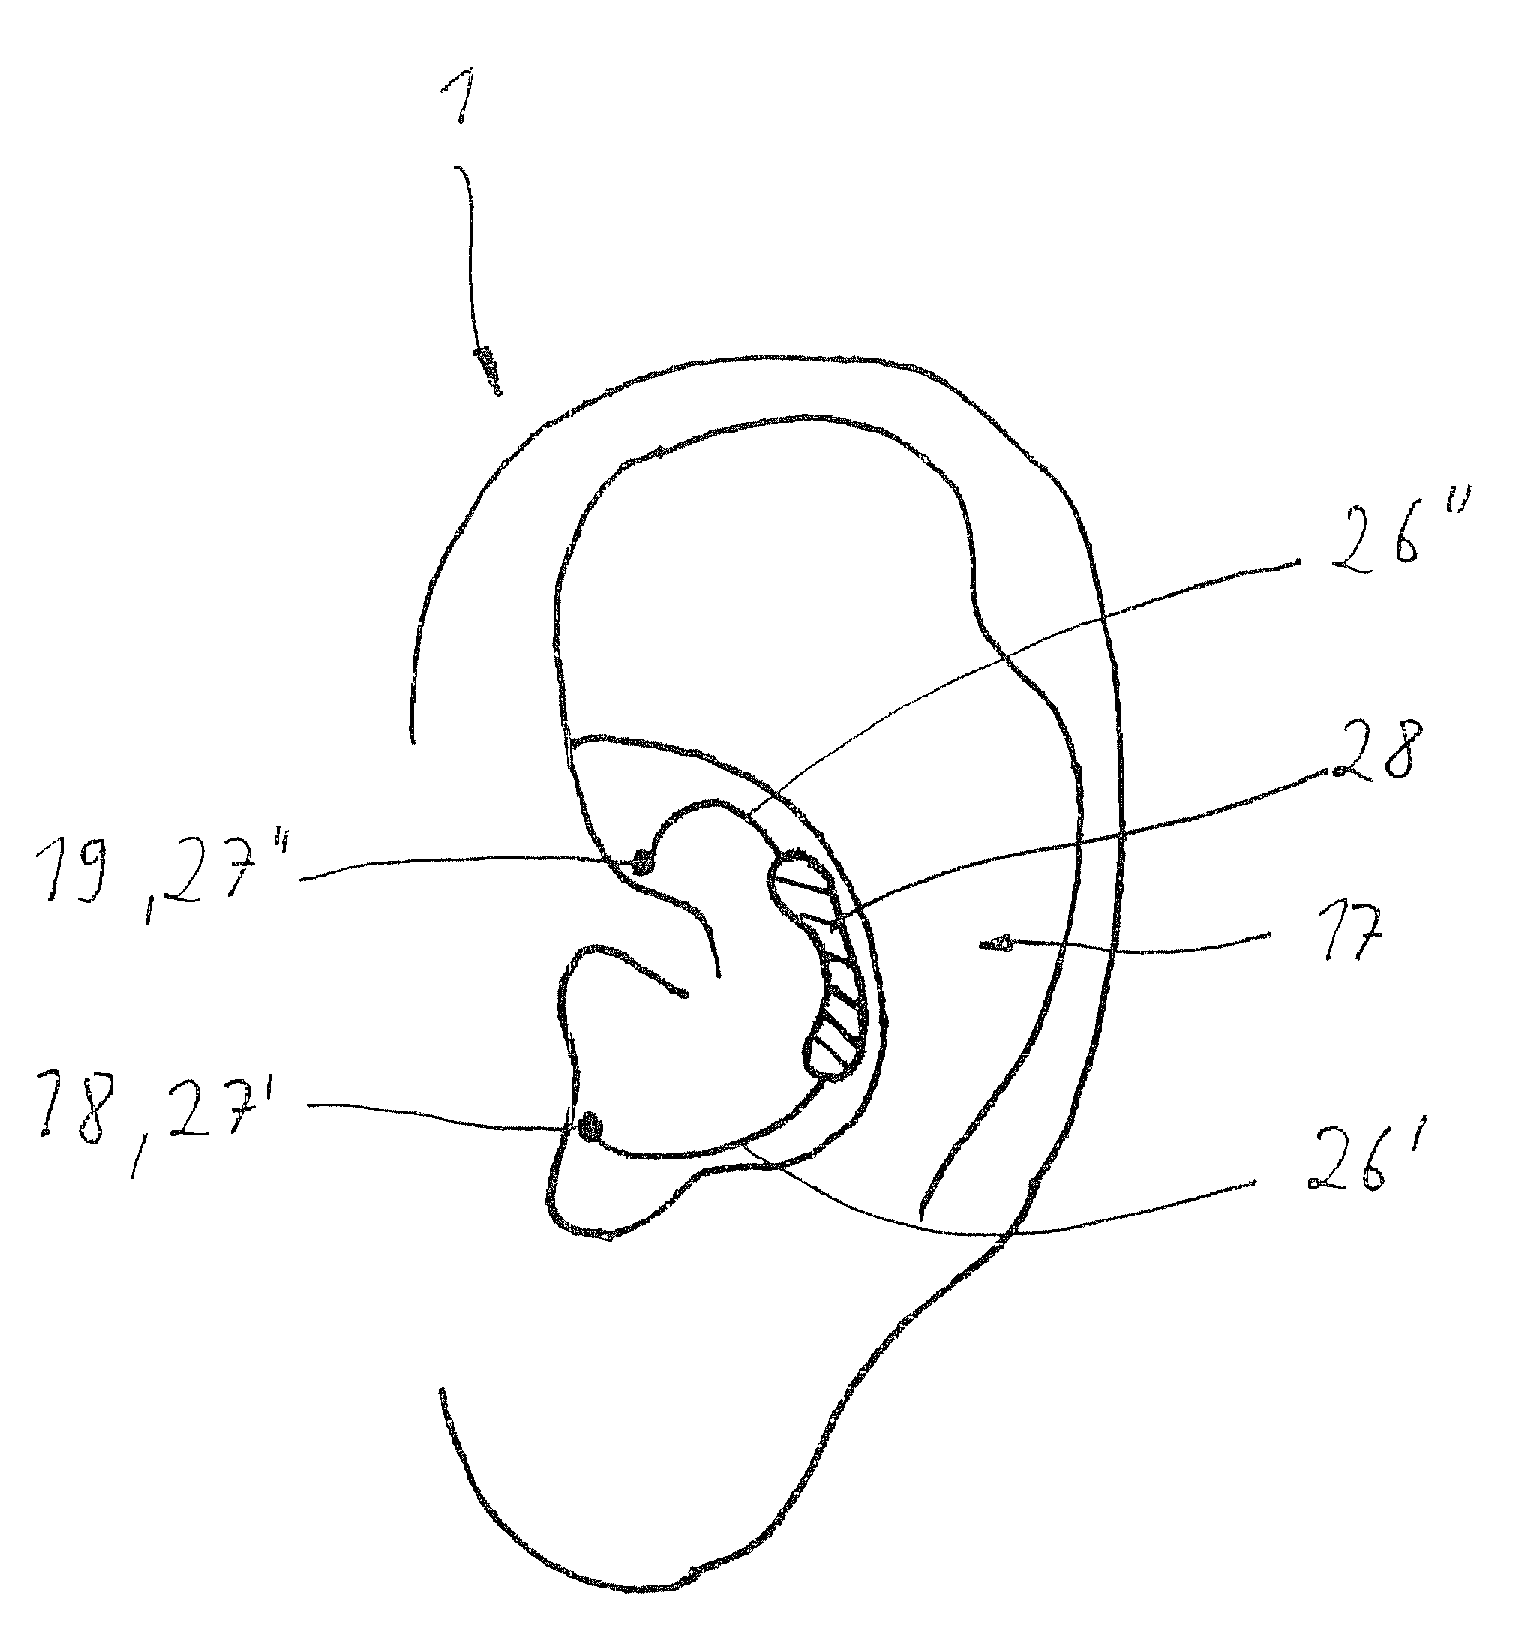 Device for applying a transcutaneous stimulus or for transcutaneous measuring of a parameter